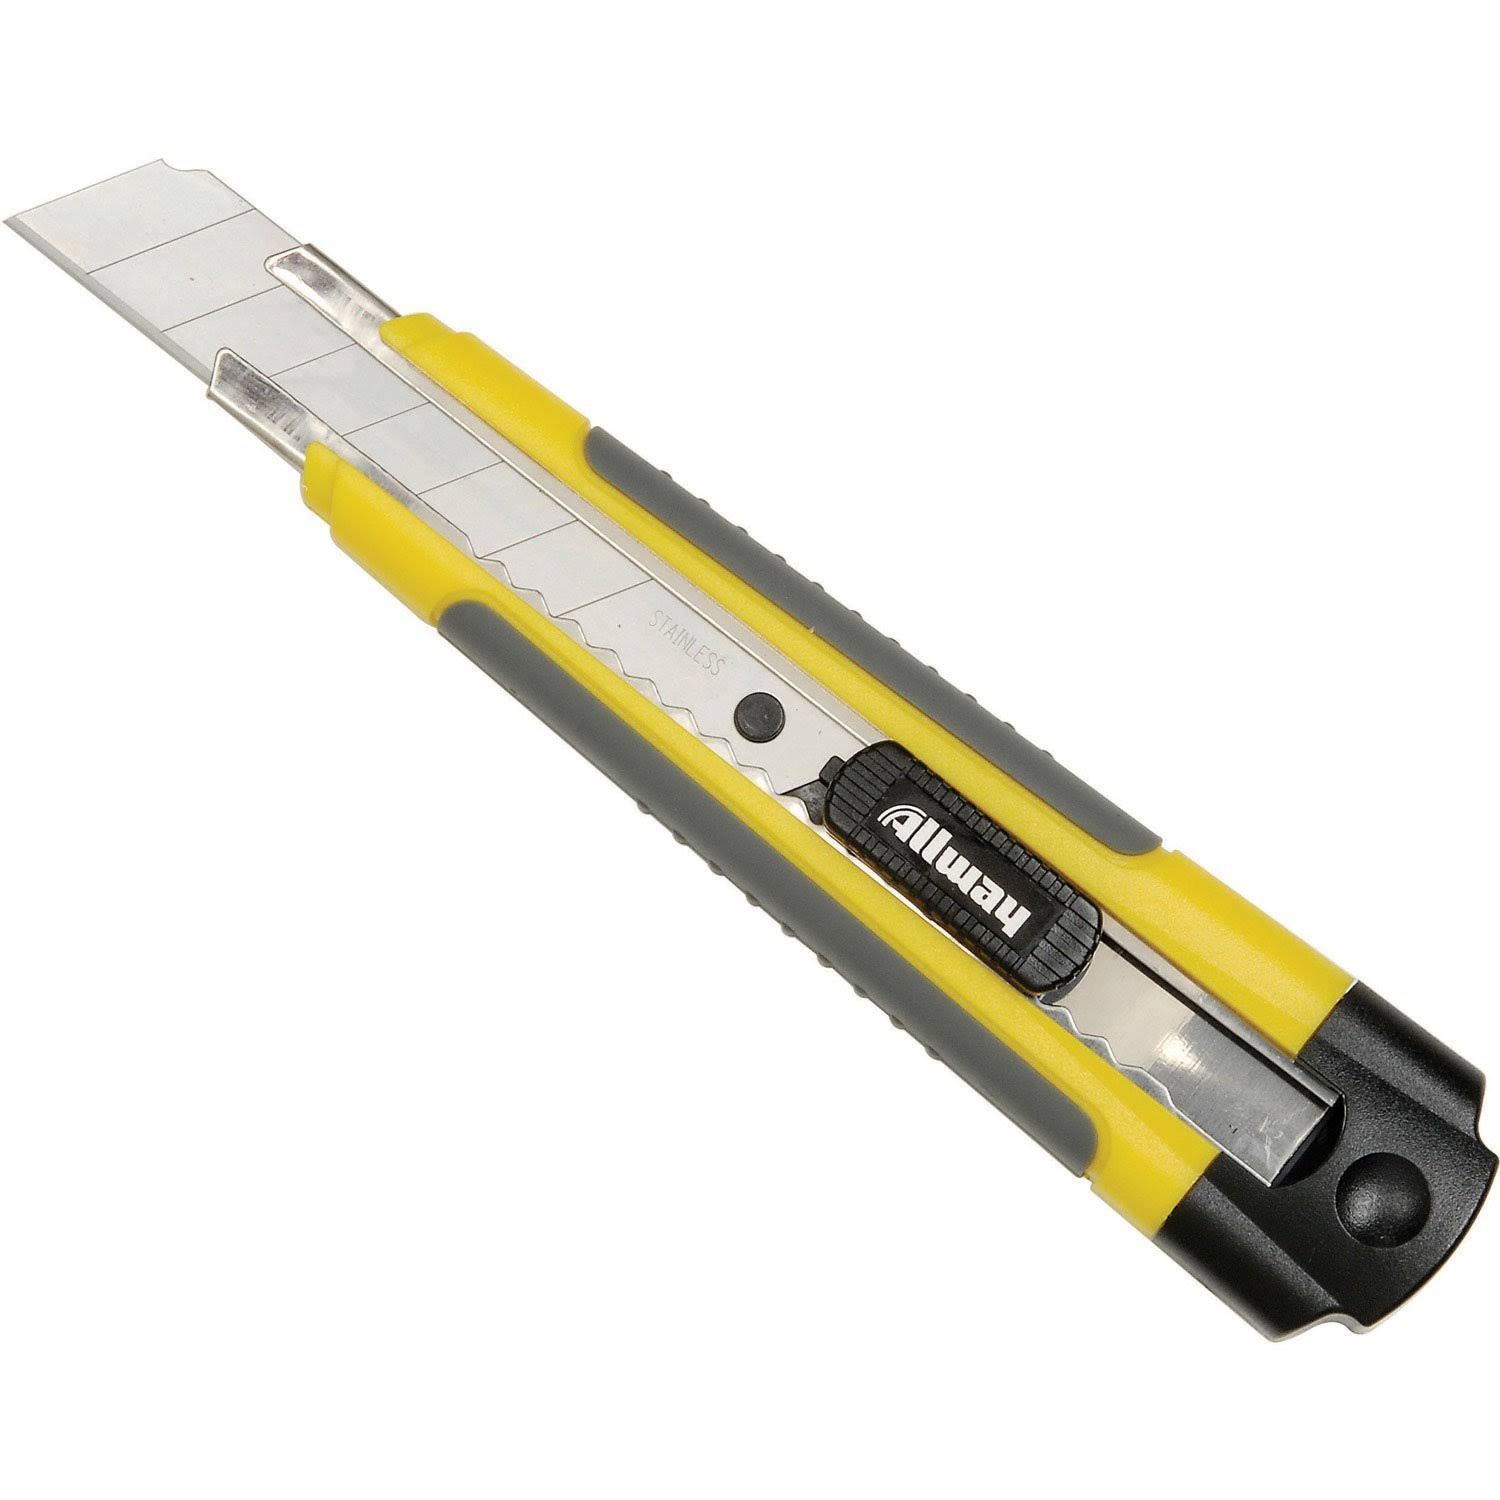 Soft Grip Snap Blade Box Cutter with Auto-Lock and 3 Blades